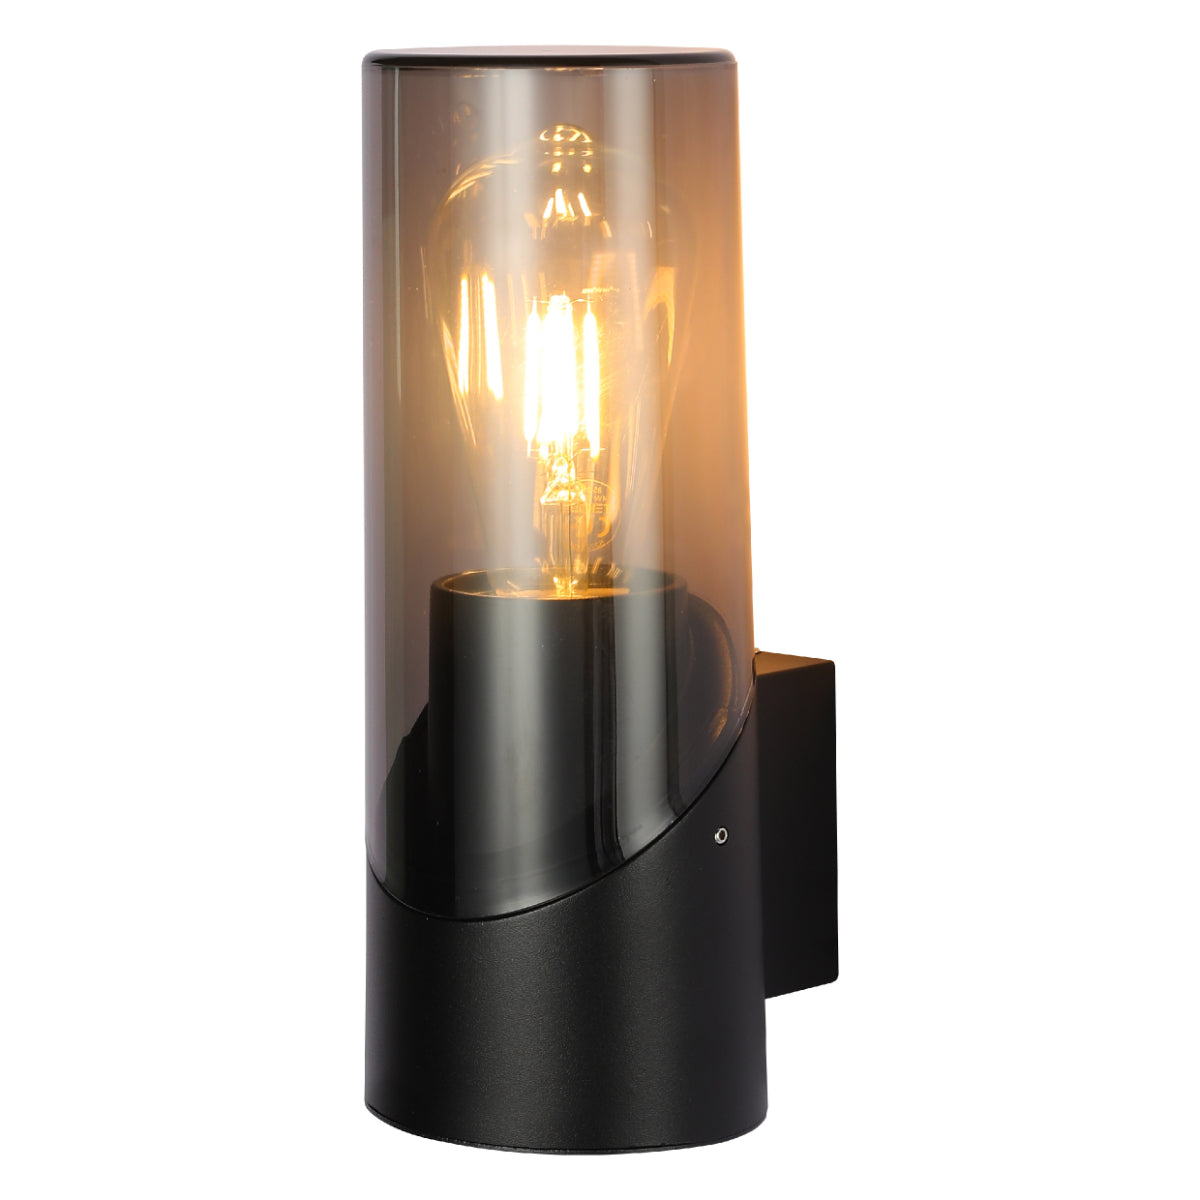 Main image of Norman Newport Outdoor Wall Light Sconce IP54 182-03425